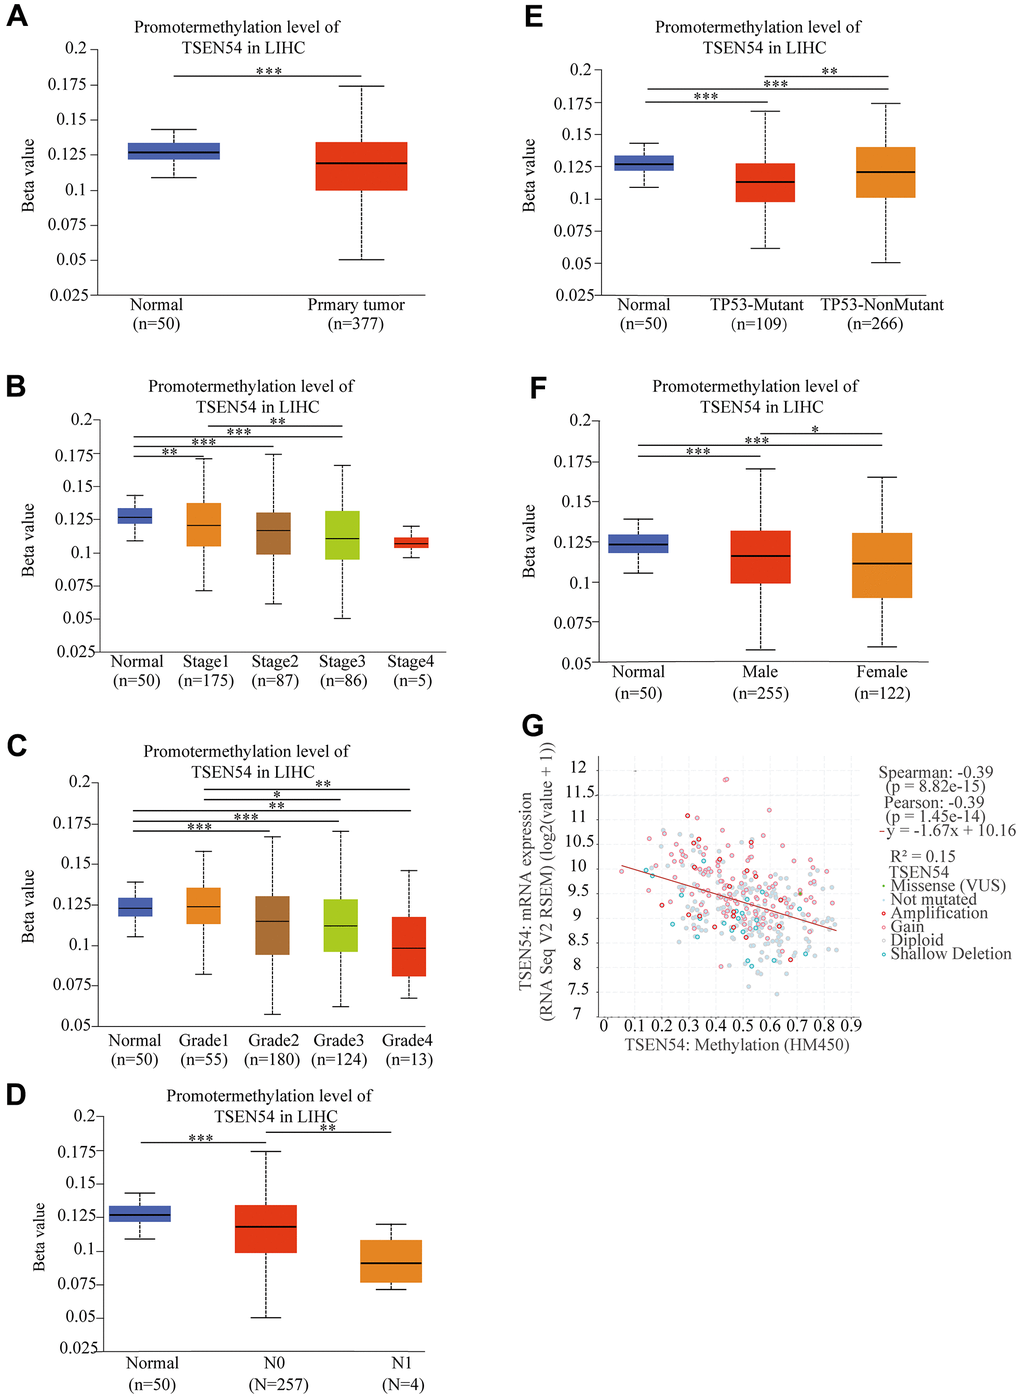 The TSEN54 promoter methylation level is correlated with clinicopathological features. (A) sample type; (B) stage; (C) grade; (D) lymph node metastasis; (E) TP53 mutation status; (F) patient’s gender. (G) The correlation between TSEN54 methylation and its mRNA expression.